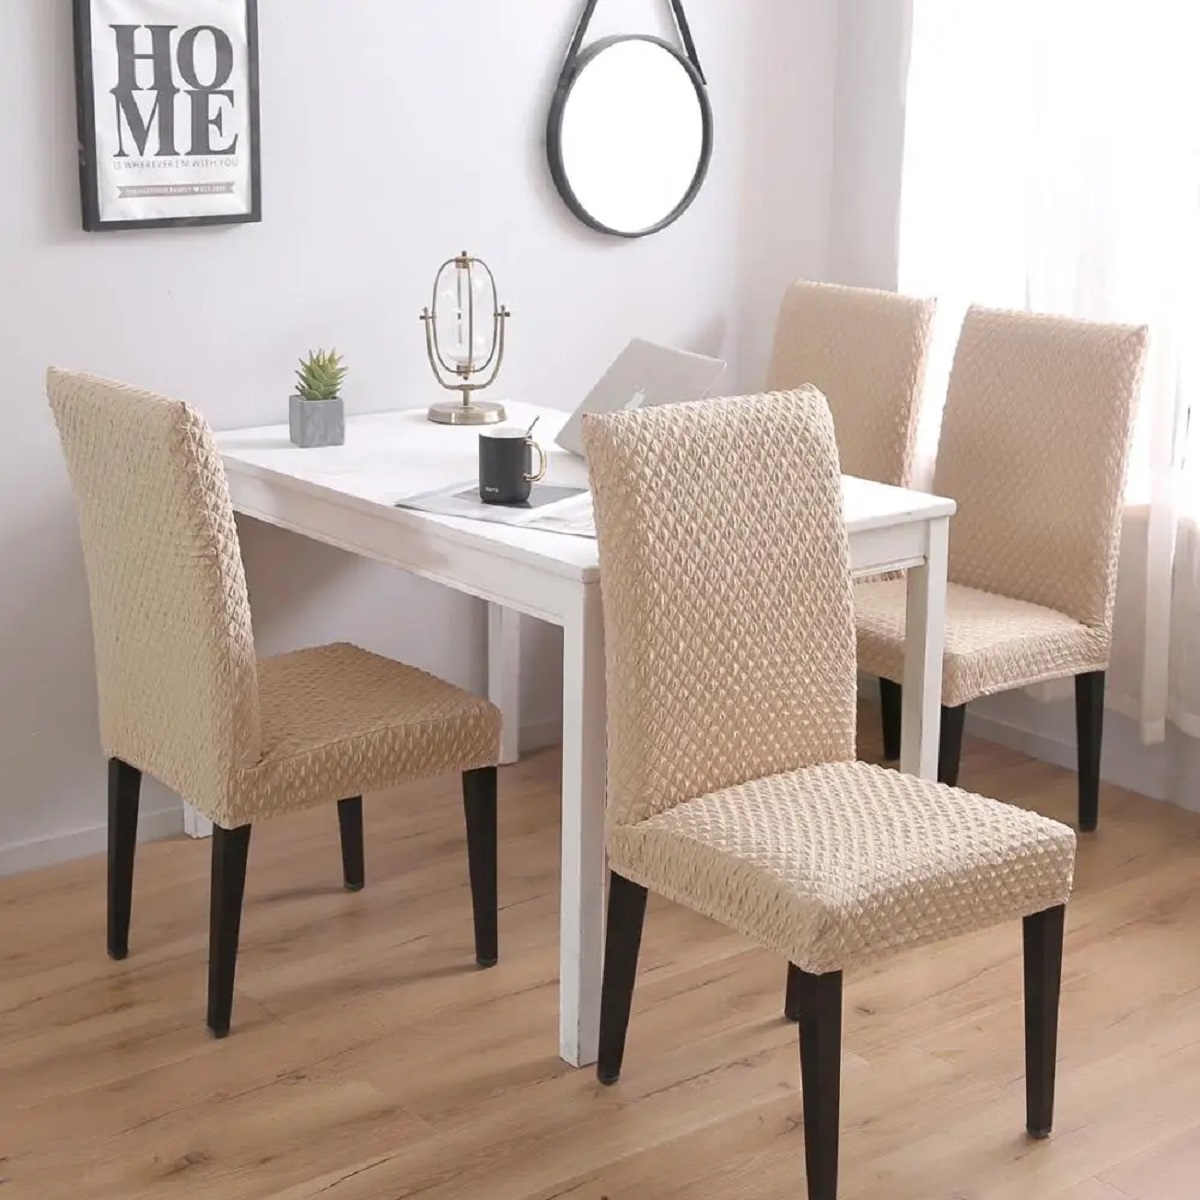 How To Create Cushions For Dining Room Chairs